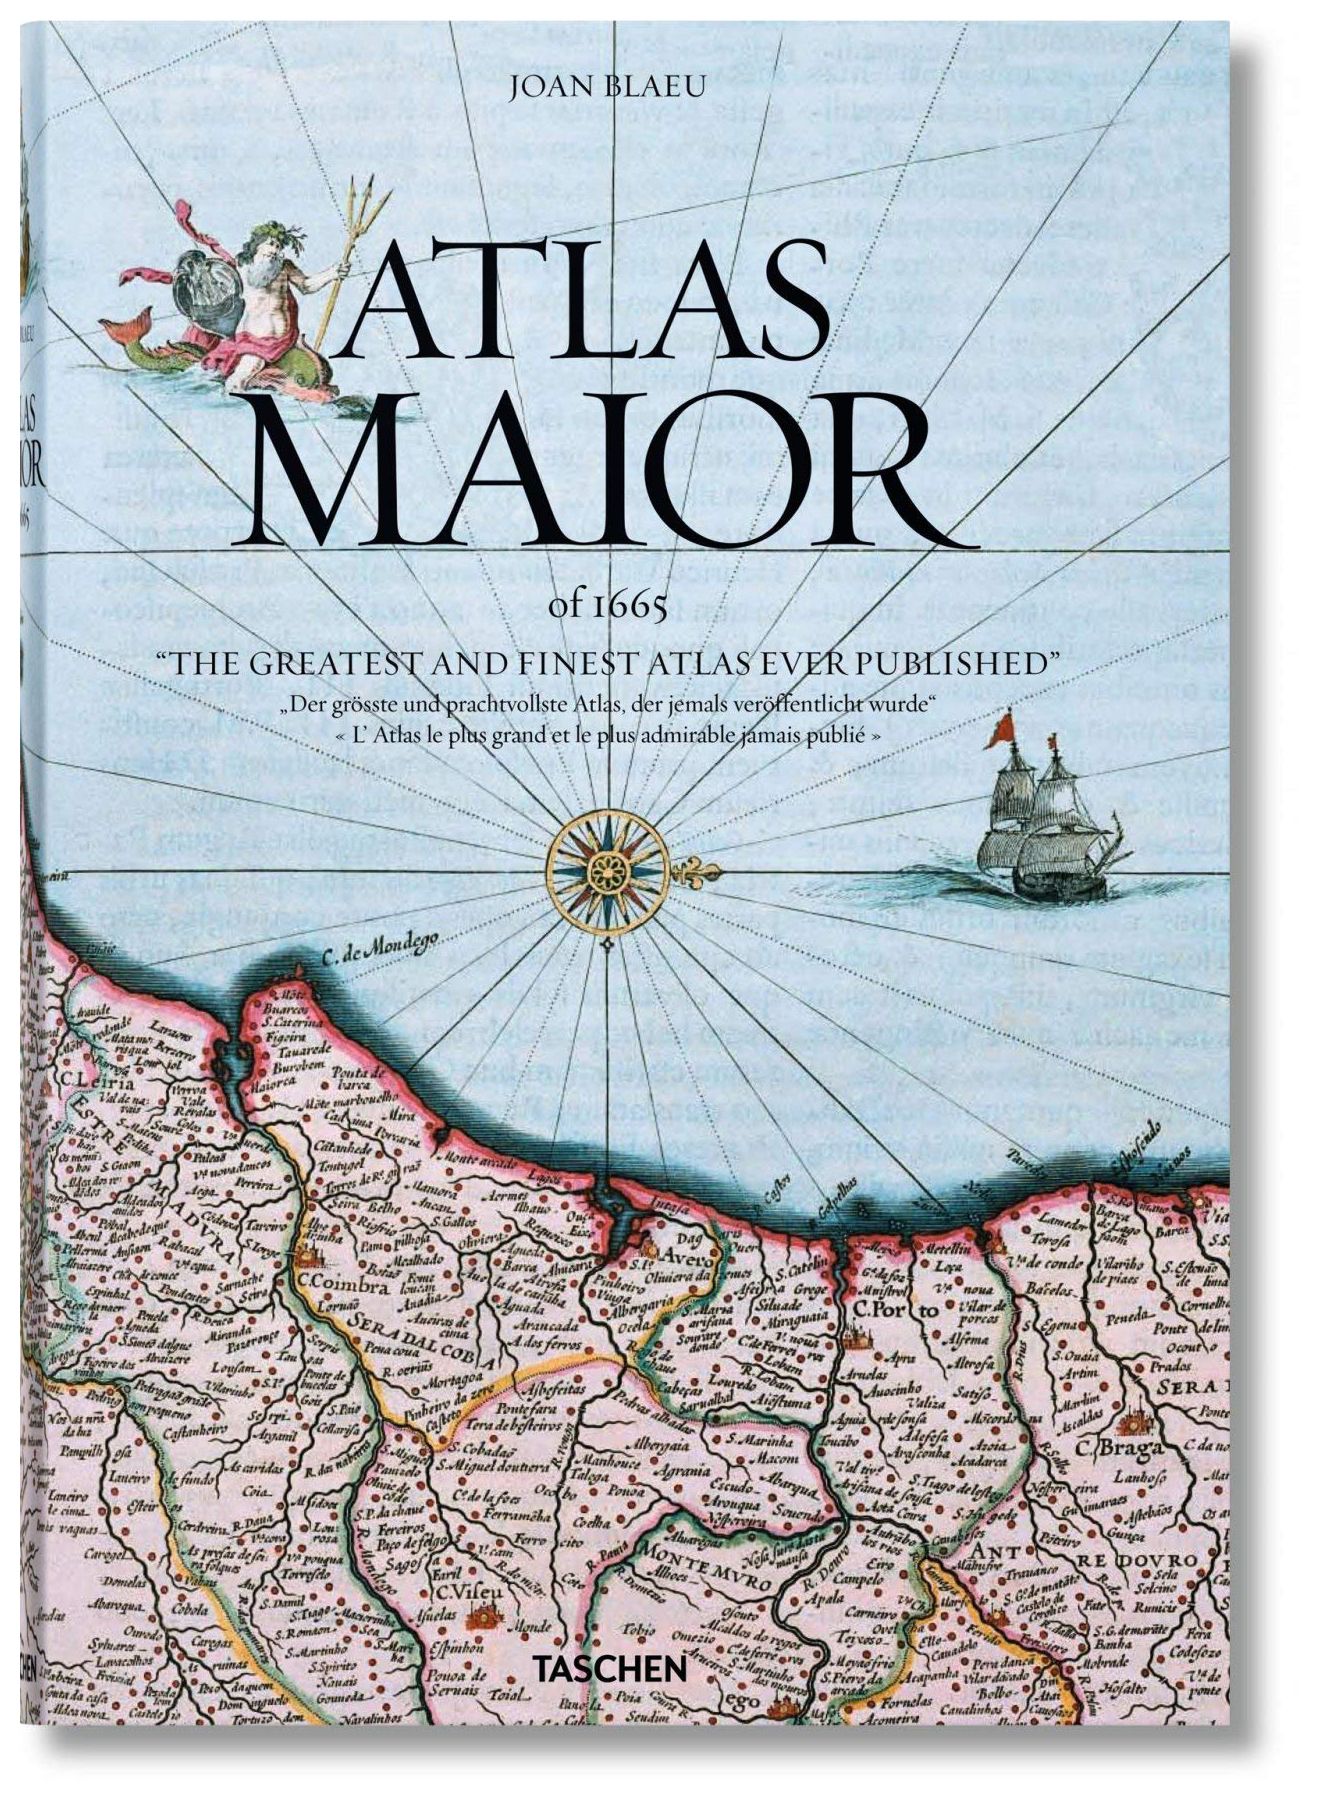 Atlas Maior by Joan Blaeu the atlas of space rocket launch sites